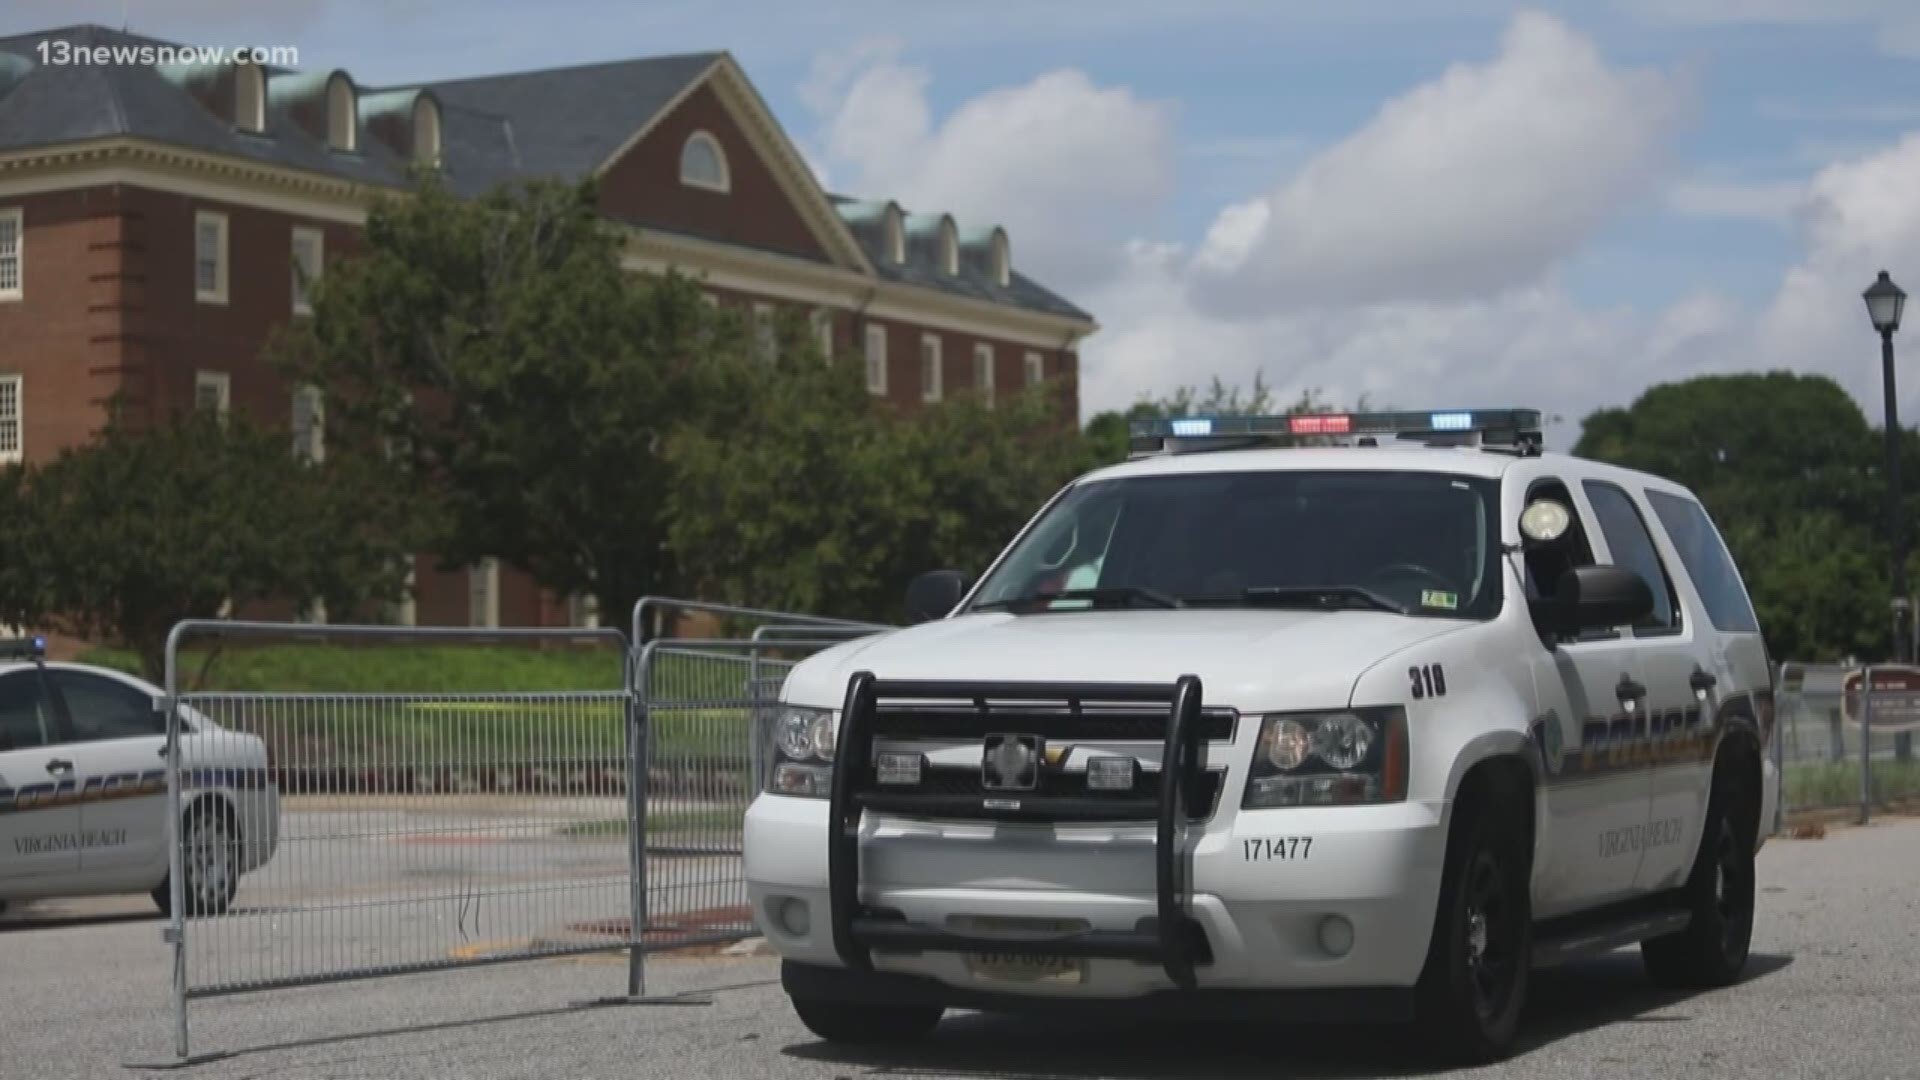 The Virginia Beach Police Department will give a briefing on September 24 that could include a timeline of events. Hillard Heintze will also provide some updates.